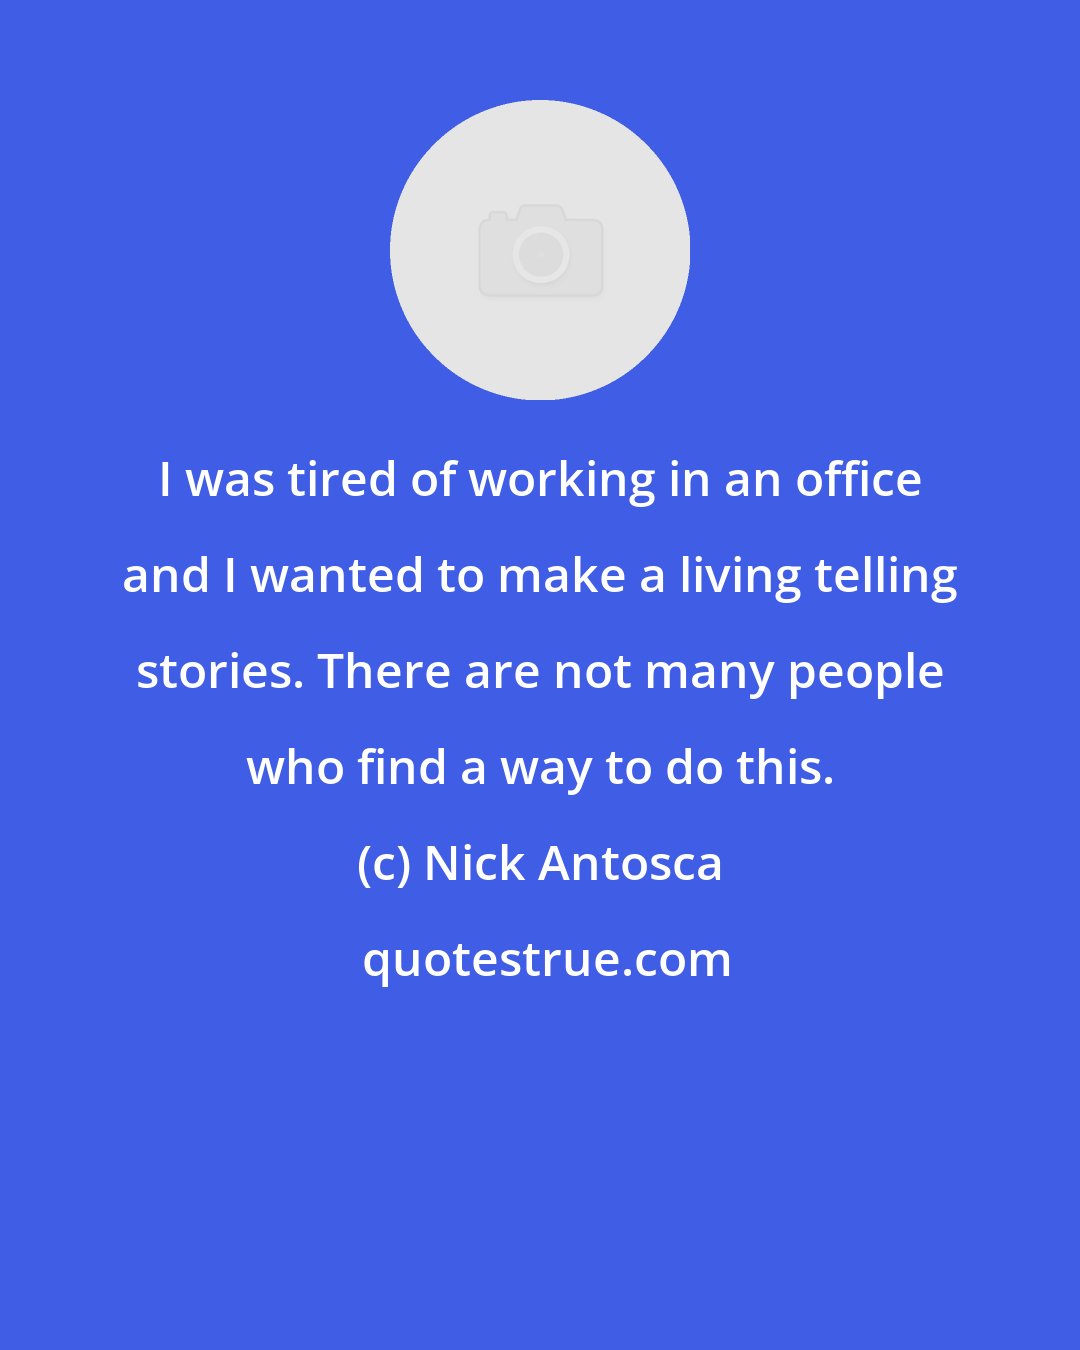 Nick Antosca: I was tired of working in an office and I wanted to make a living telling stories. There are not many people who find a way to do this.